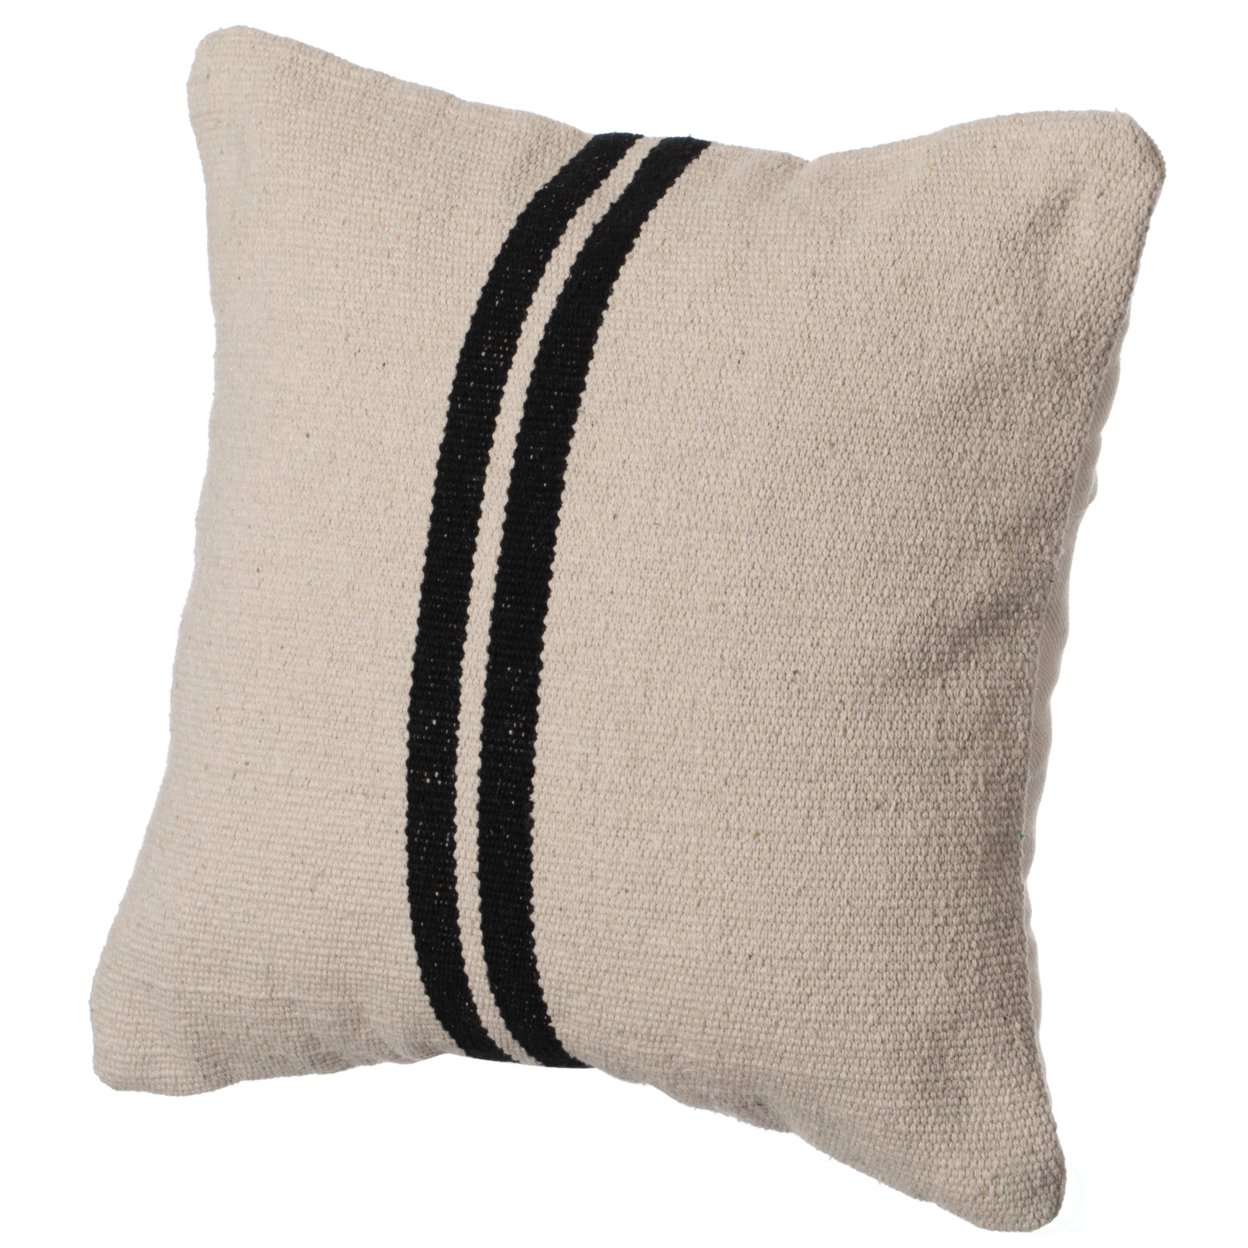 16 Handwoven Cotton Throw Pillow Cover Flat Natural Design - Stripes With Cushion